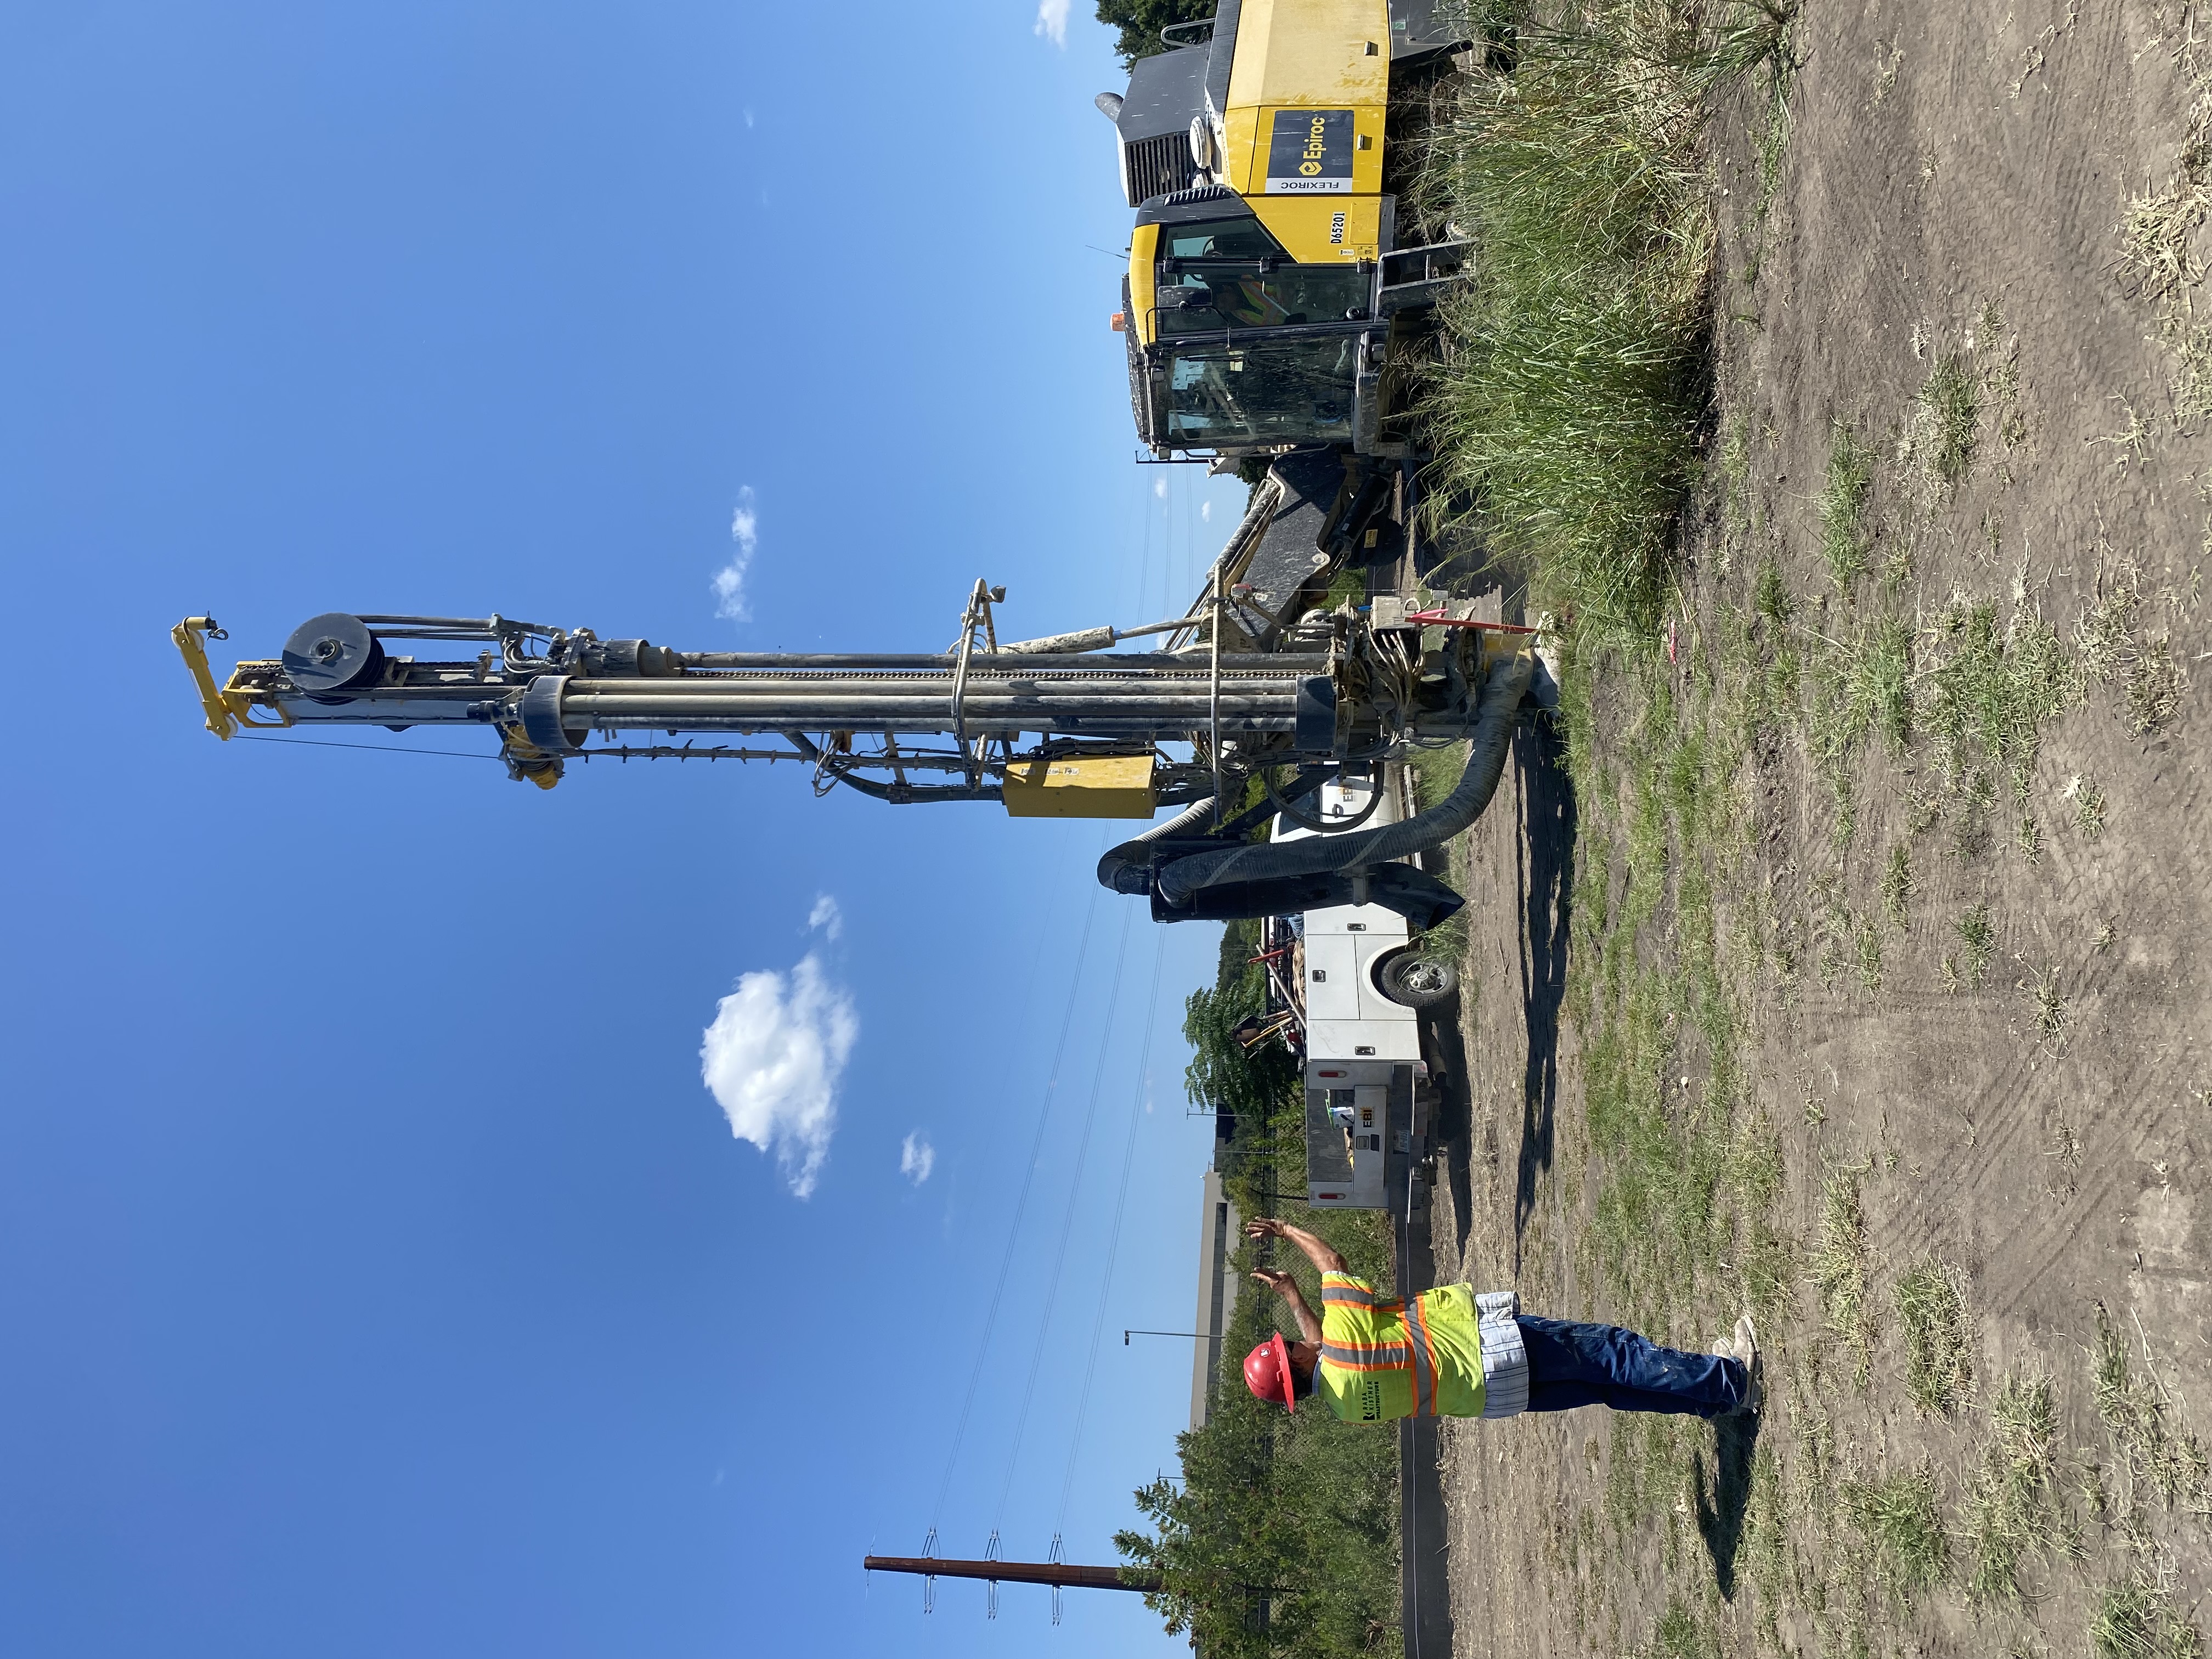 Crews move equipment into place to perform a drilling operation near William Cannon Drive, August 2021